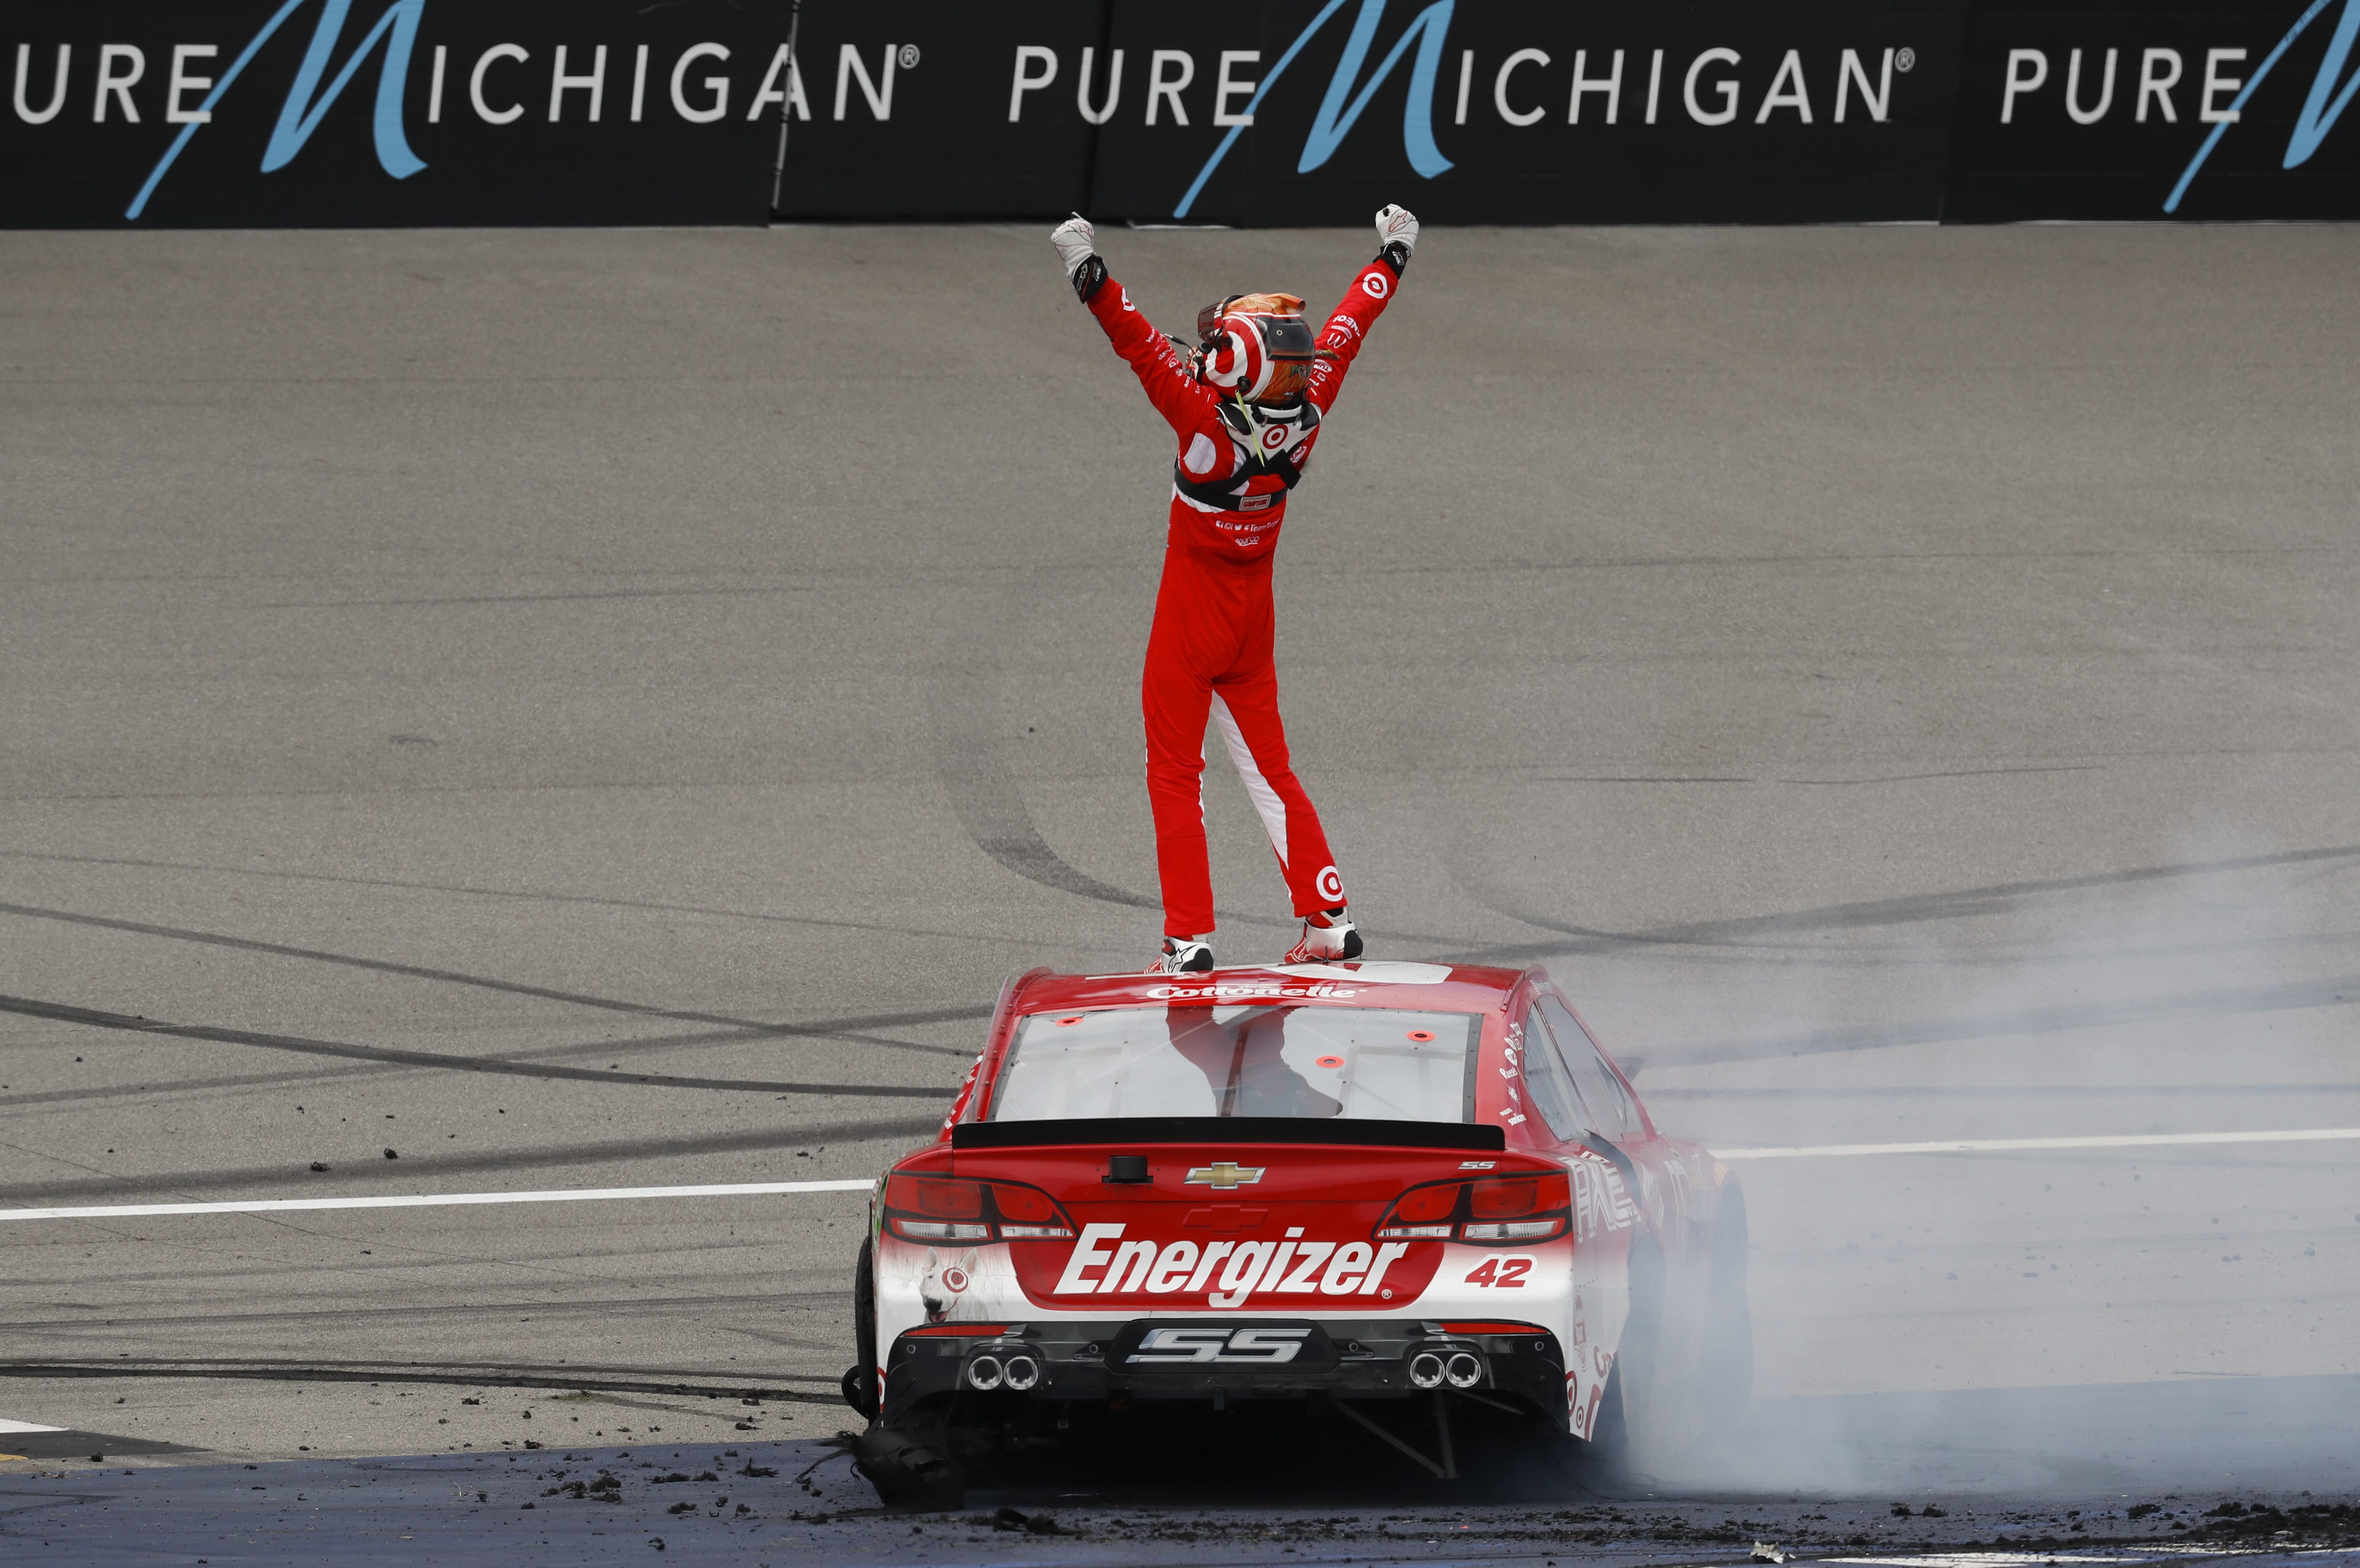 Kyle Larson celebrates winning the NASCAR Sprint Cup Series auto race at Michigan International Speedway, in Brooklyn, Mich., Sunday, Aug. 28, 2016.